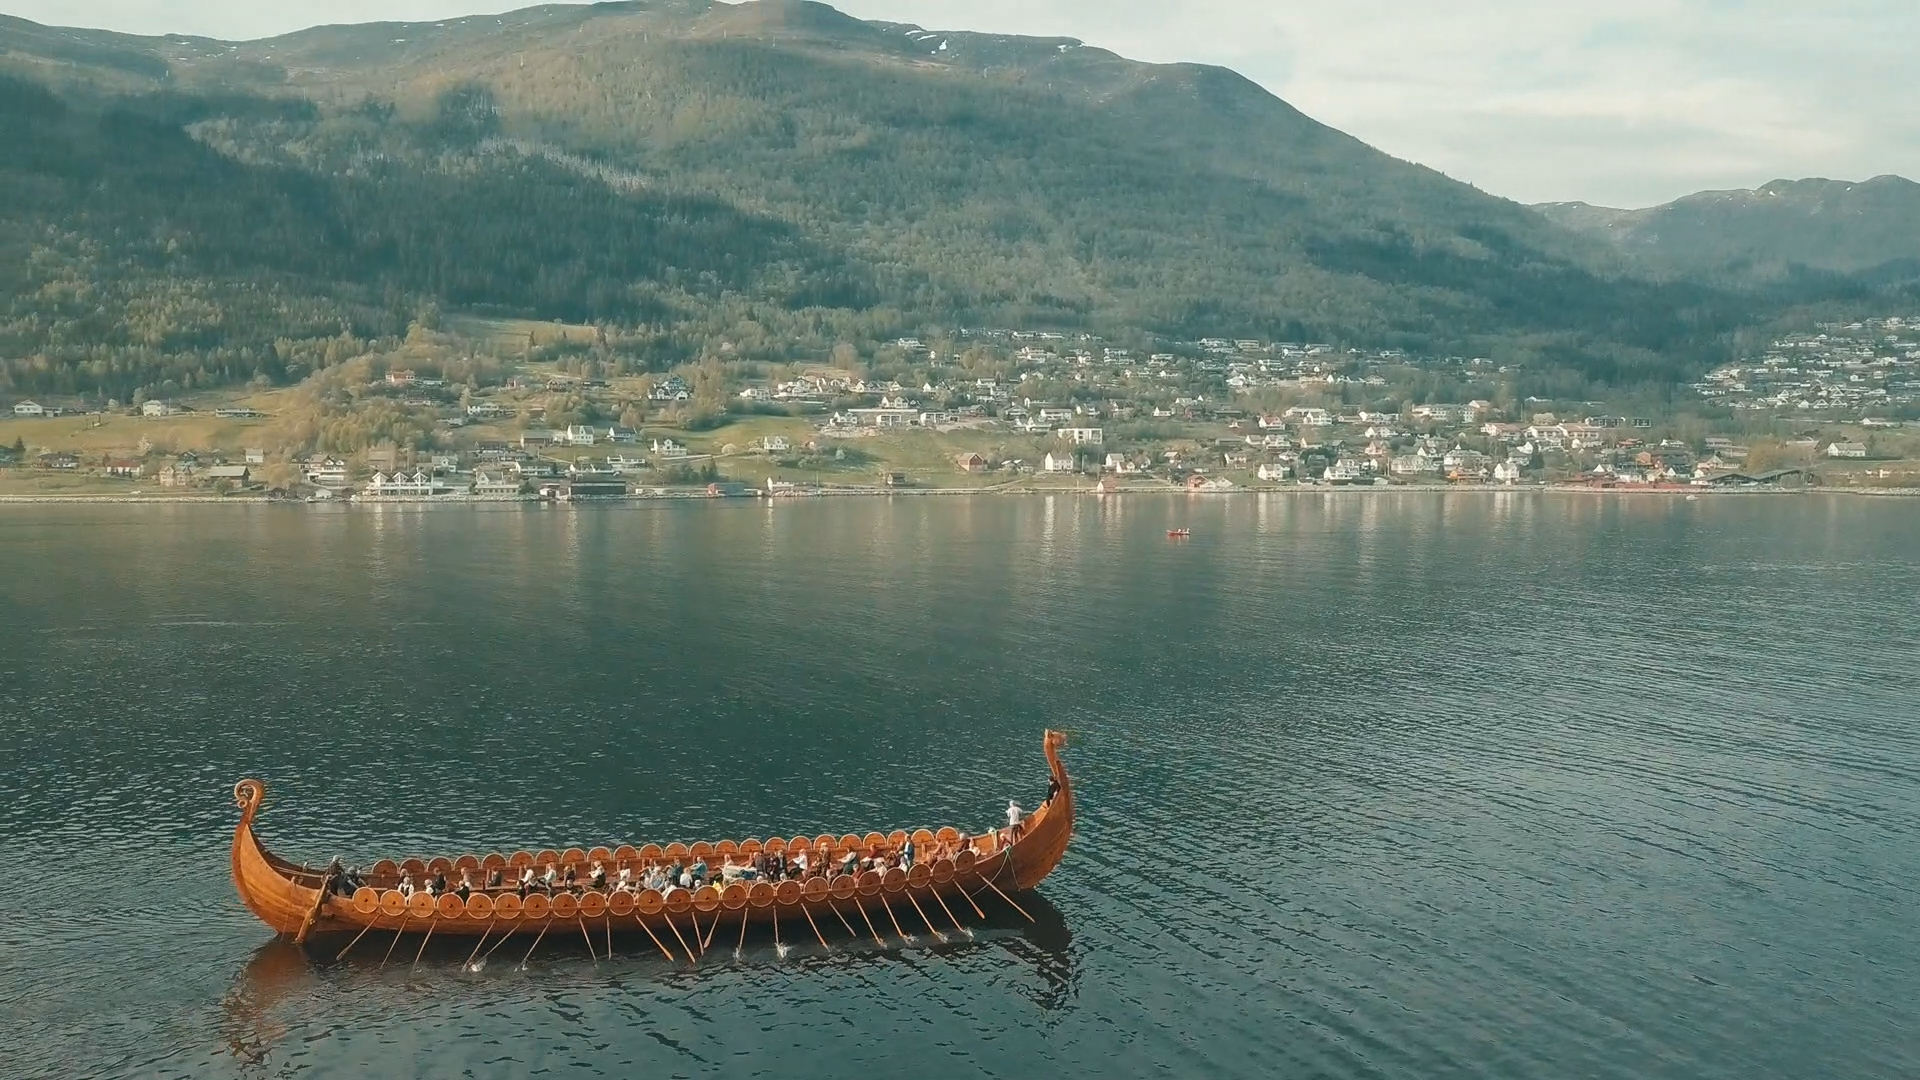 Viking history, culture, and traditions